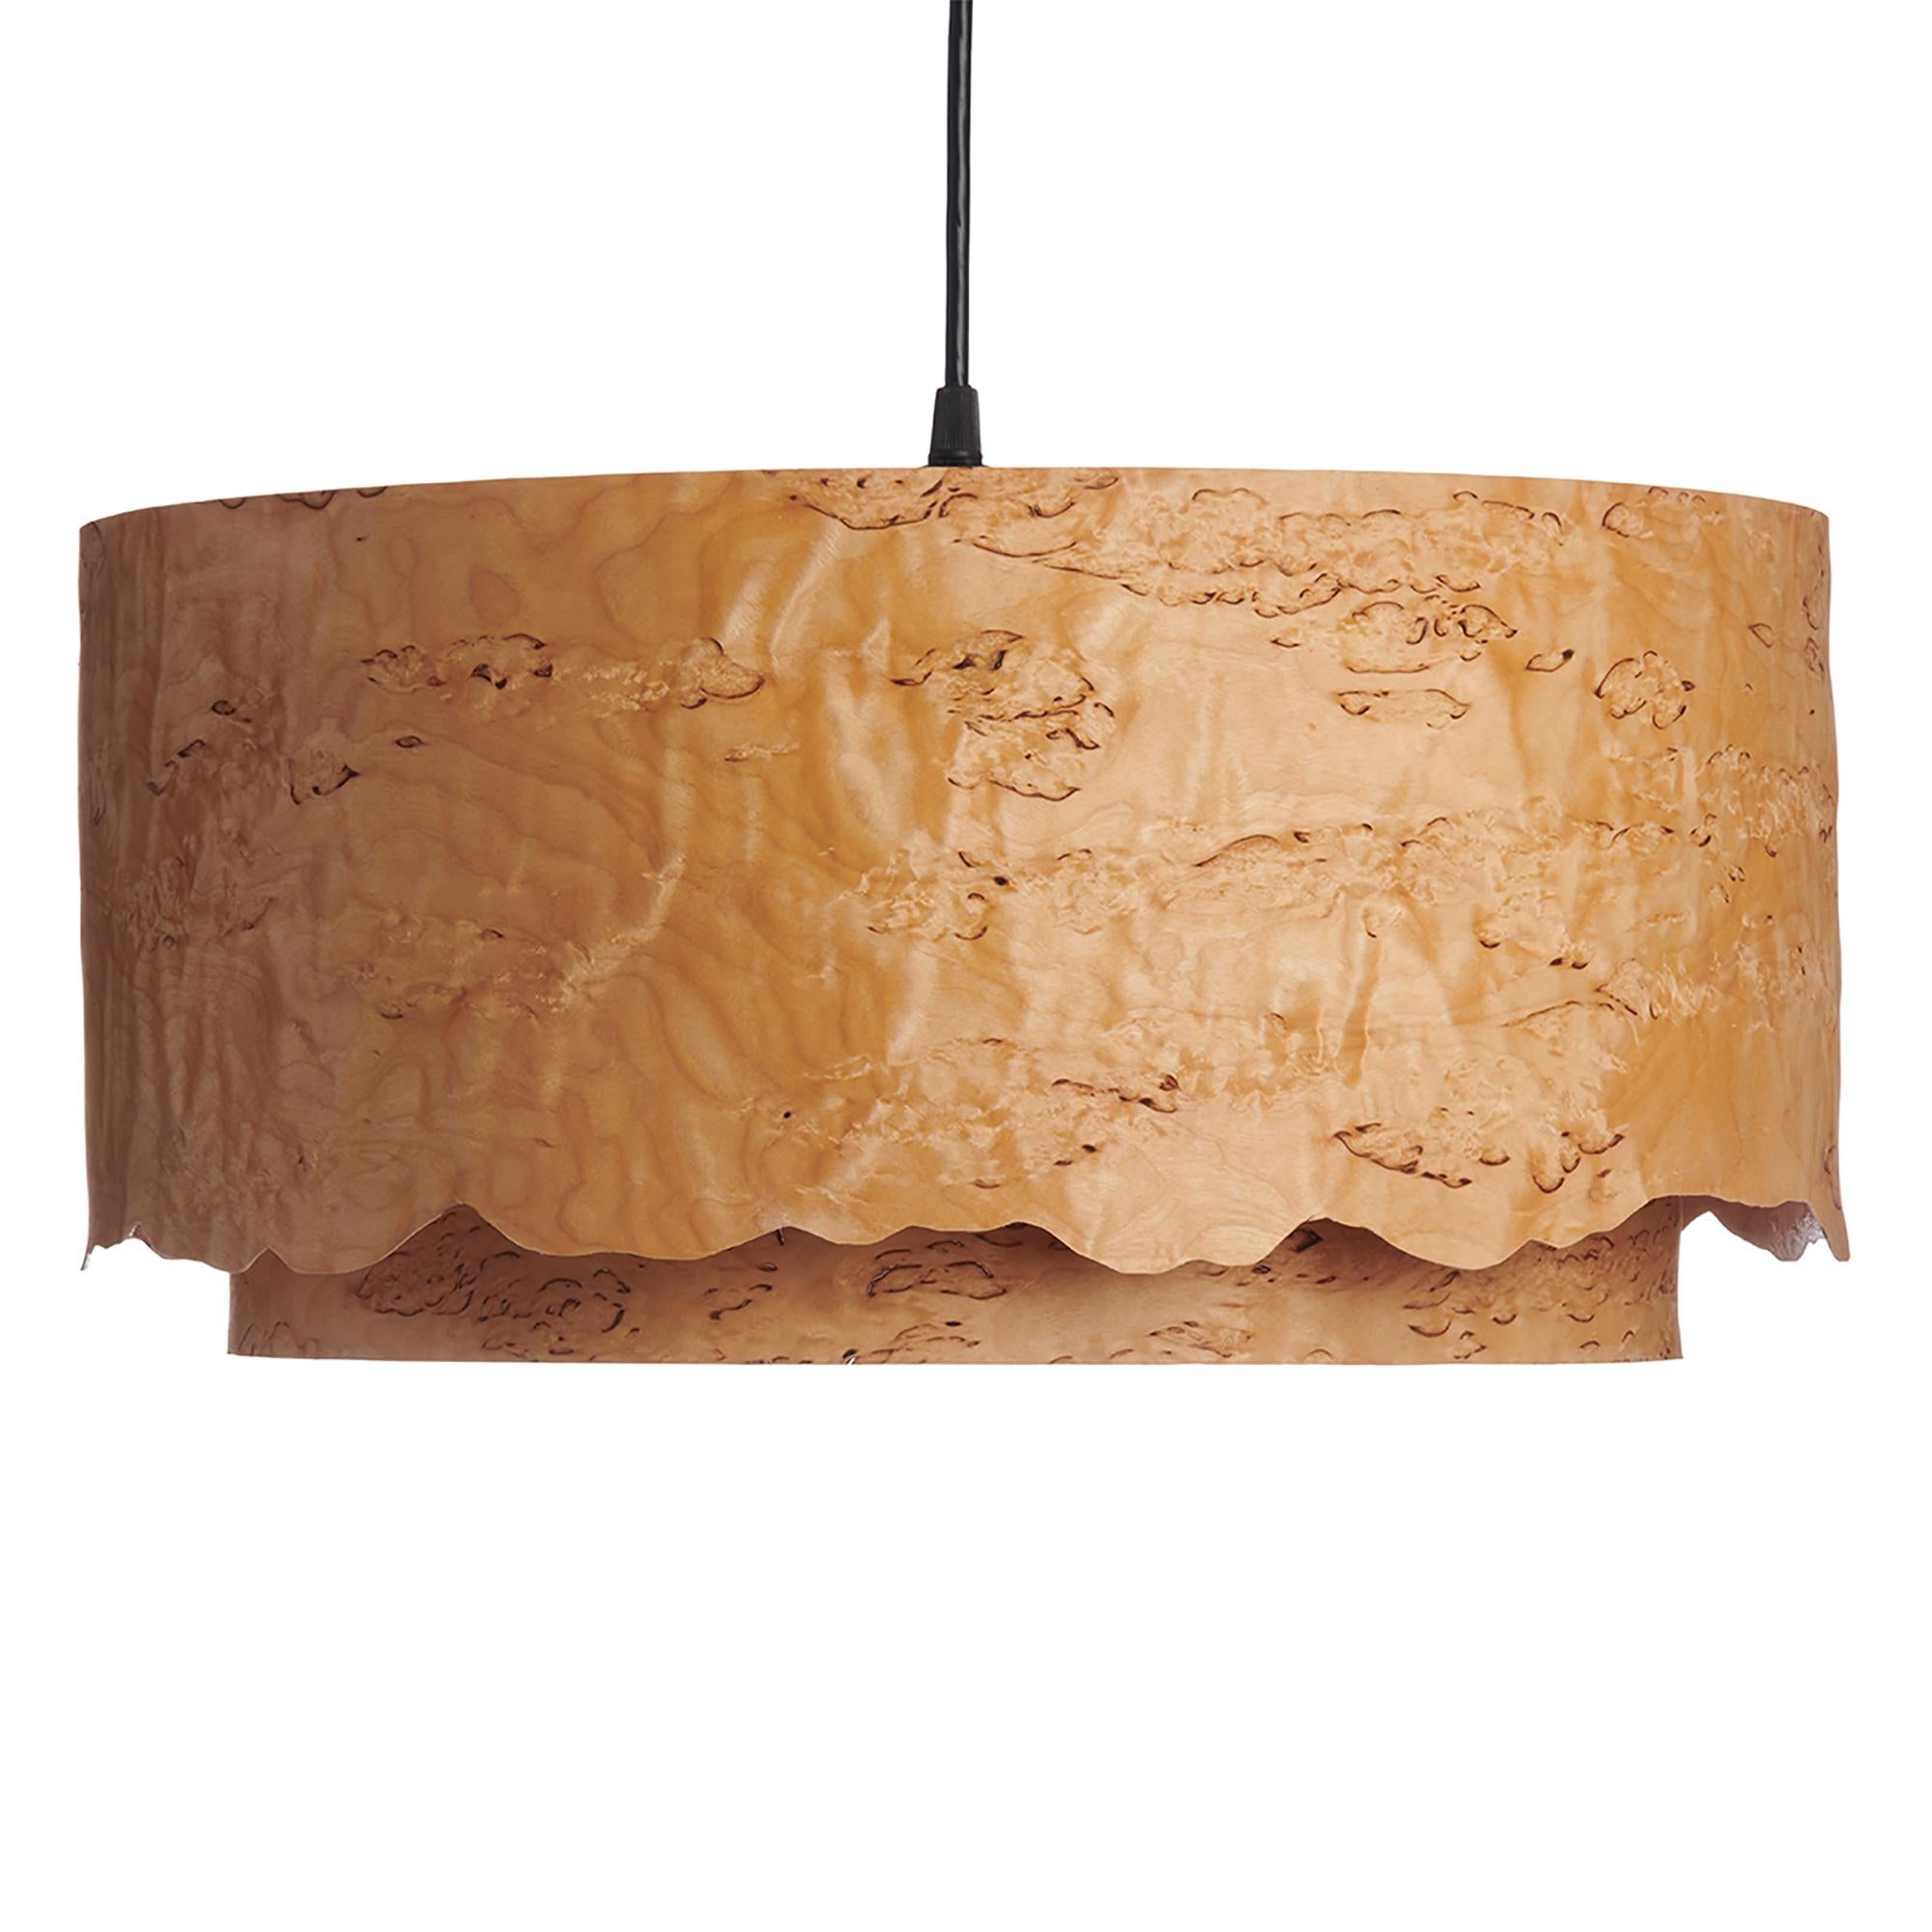 This large, Karelian Burl wood, double drum, with Live Edge is a Mid-Century Modern style chandelier. Designers use this style as an Organic Modern chandelier for alcove, entryway, dining room or conference room. ANDRO gives a warm light,